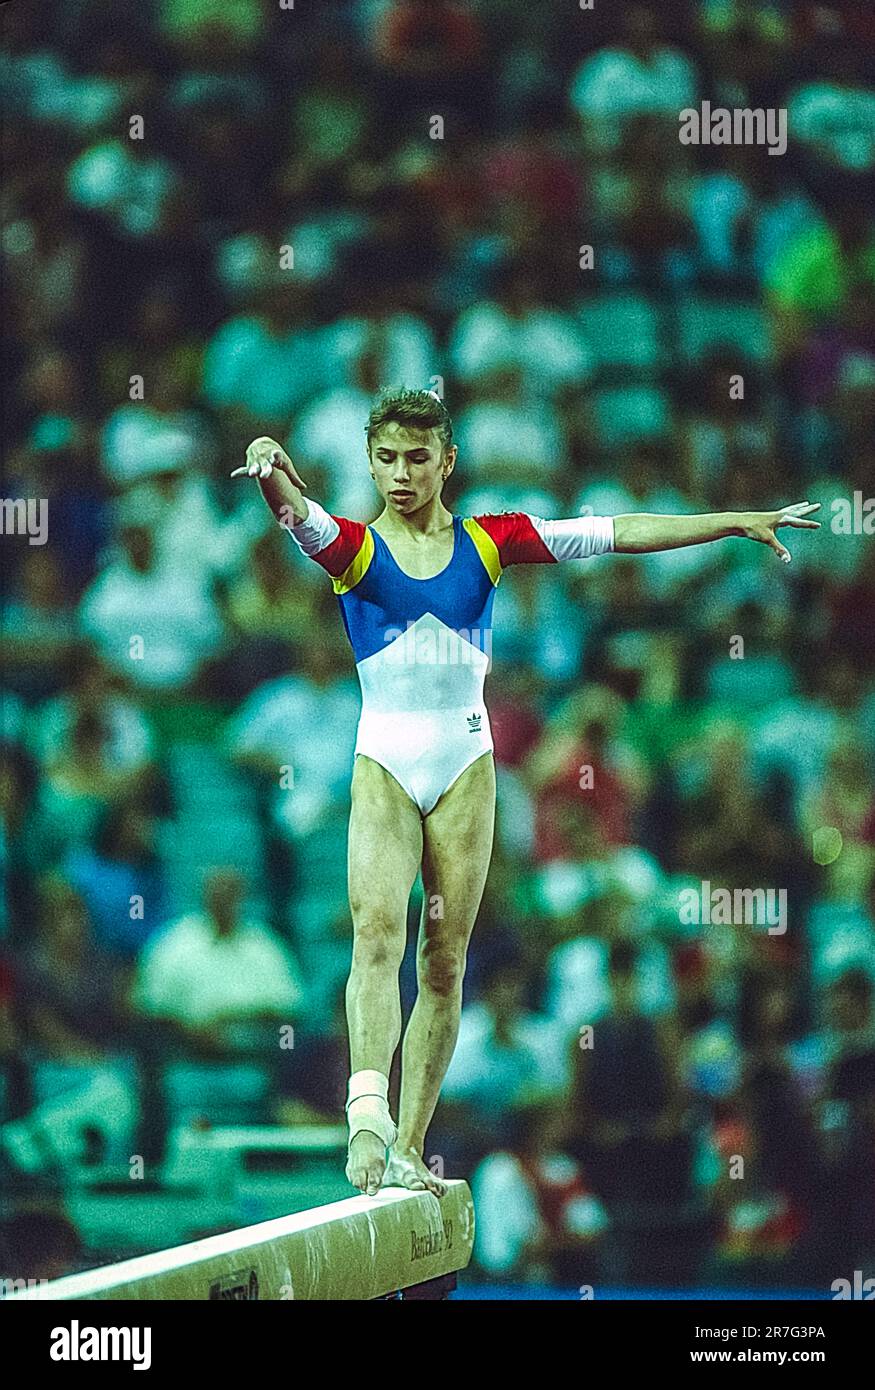 Lavinia Miloșovici (ROM) during the Gymnastics Women's artistic individual all-around at the 1992 Olymic Summer Games. Stock Photo